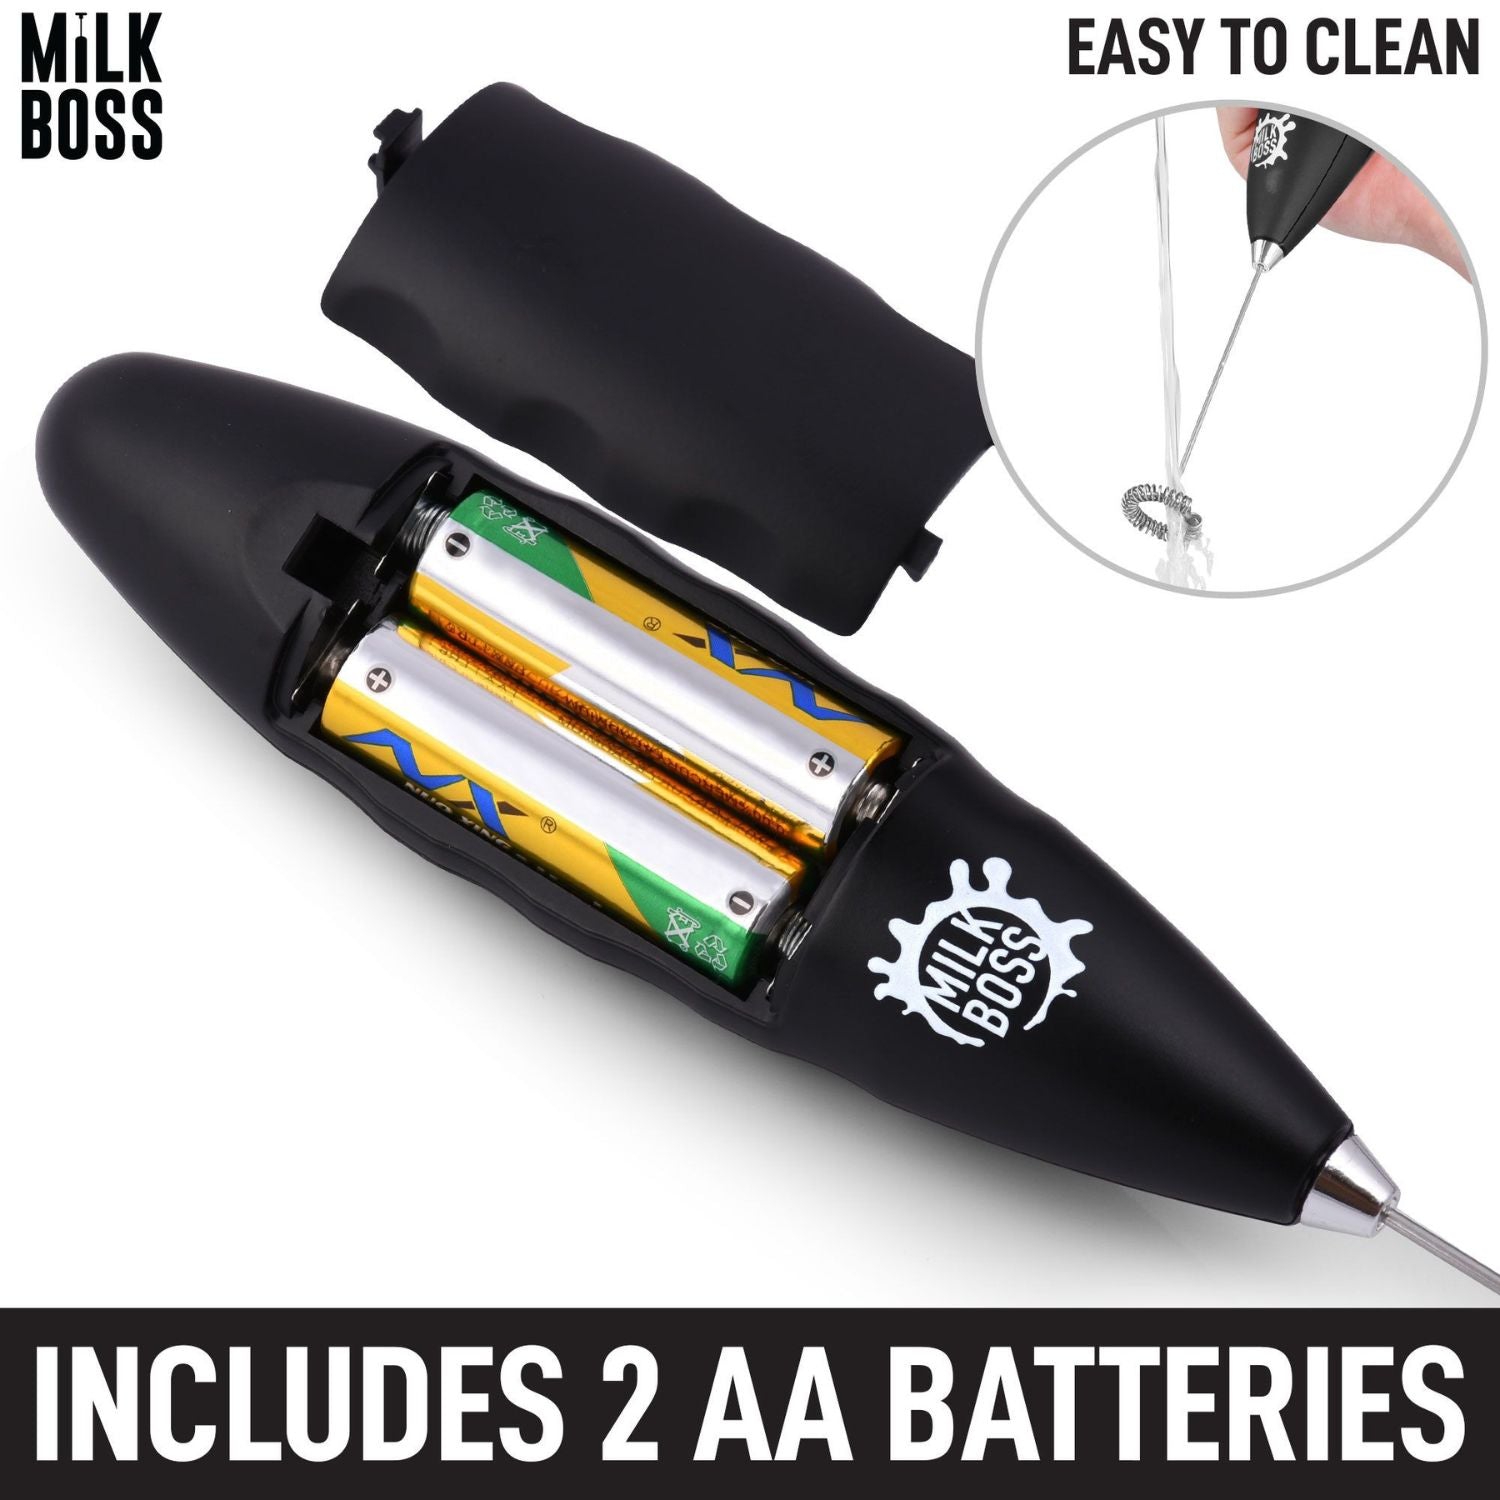 Milk frother with 2 AA Batteries